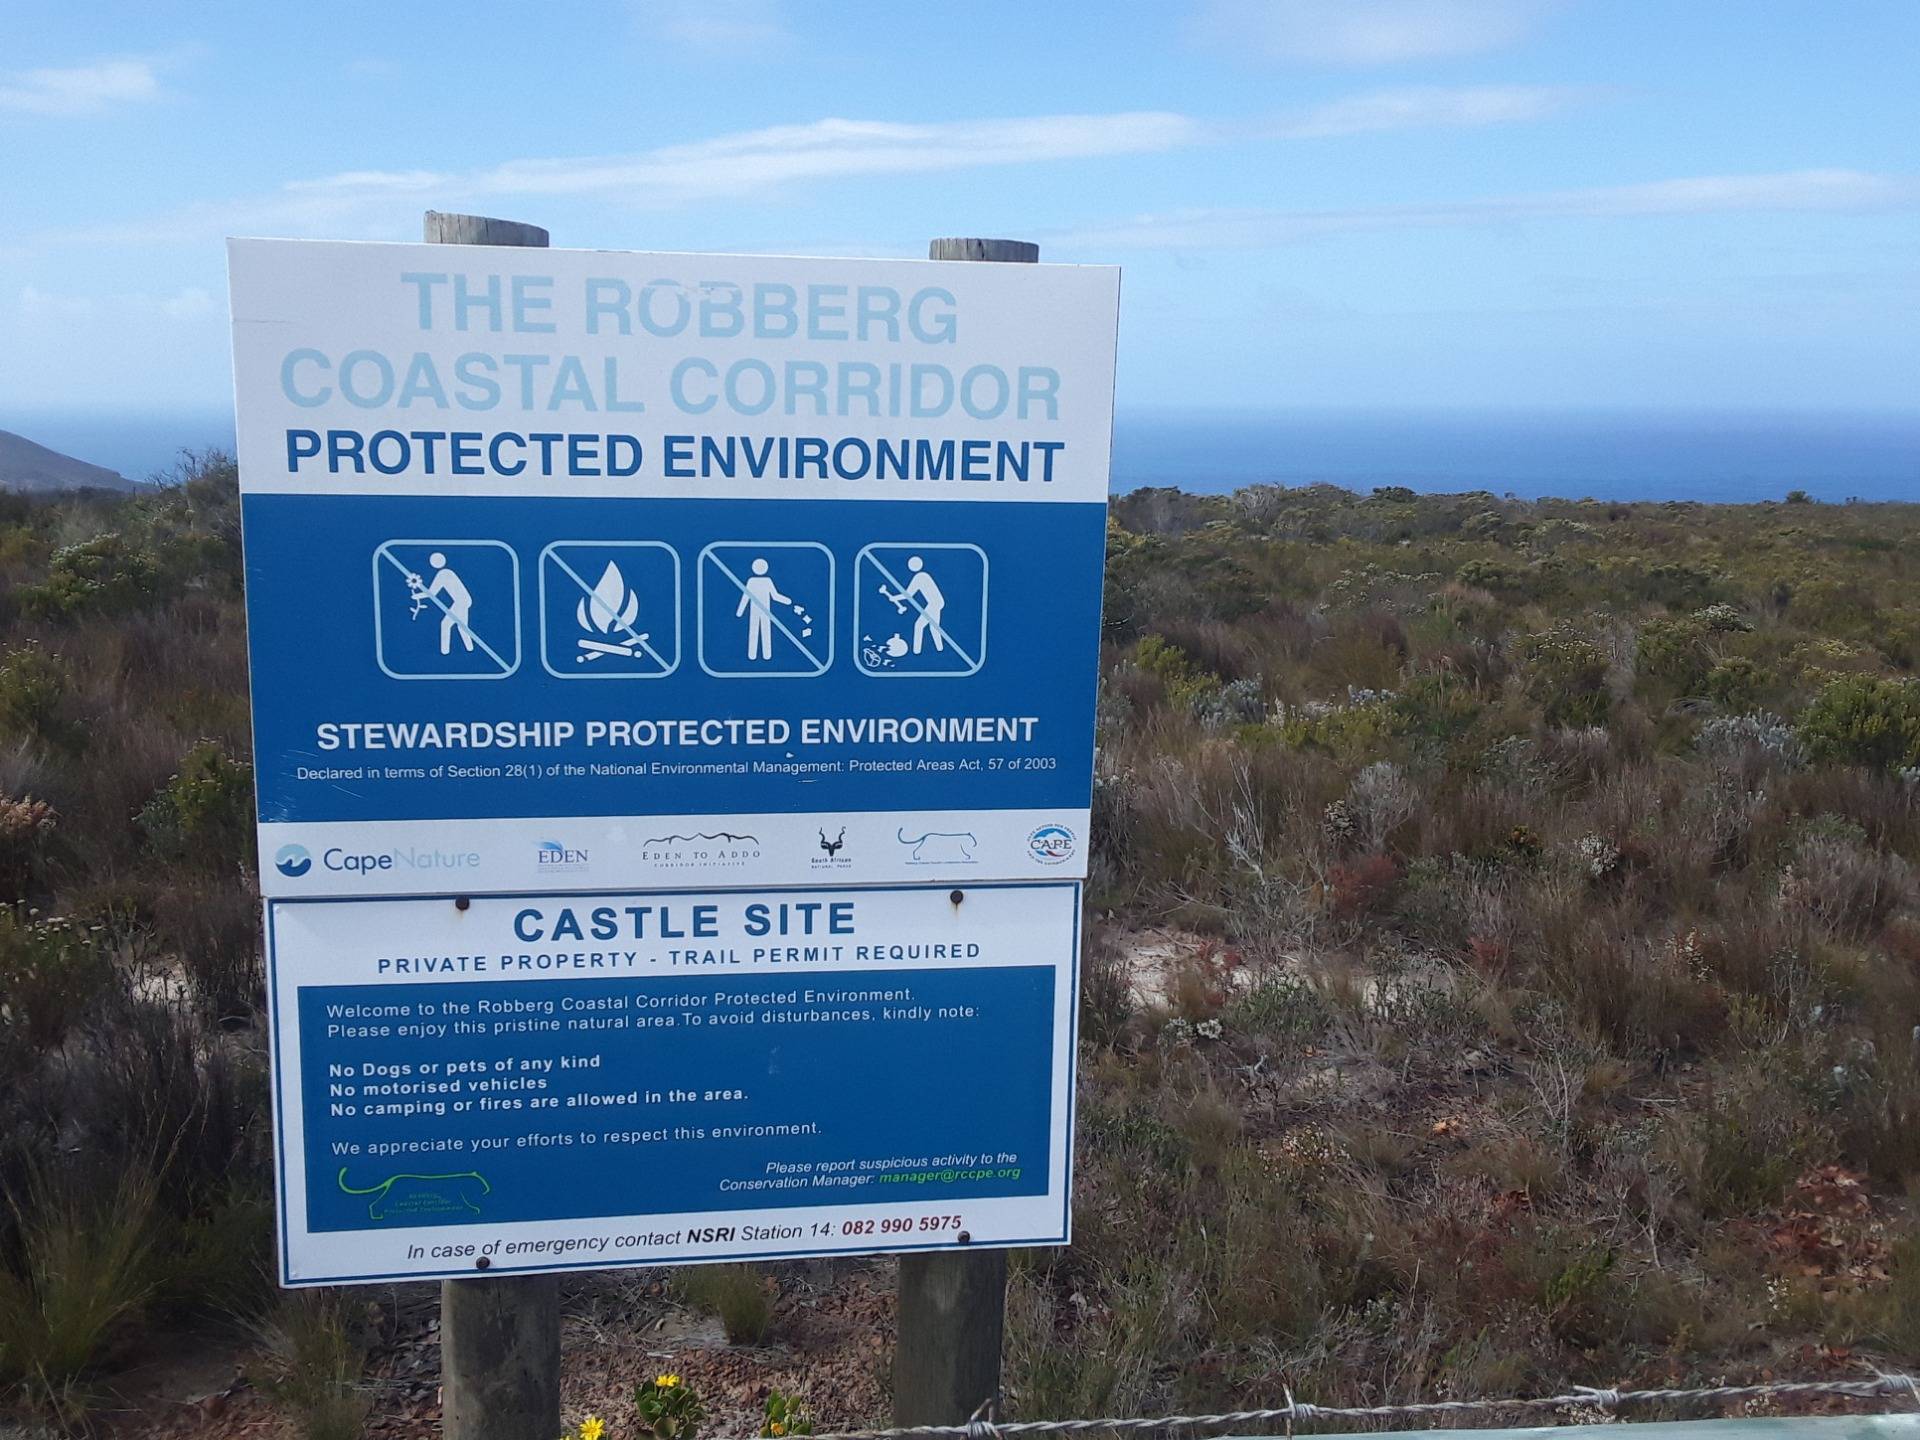 Robberg coastal corridor. That’s the official name of this hiking trail, with the Indian ocean in the distance